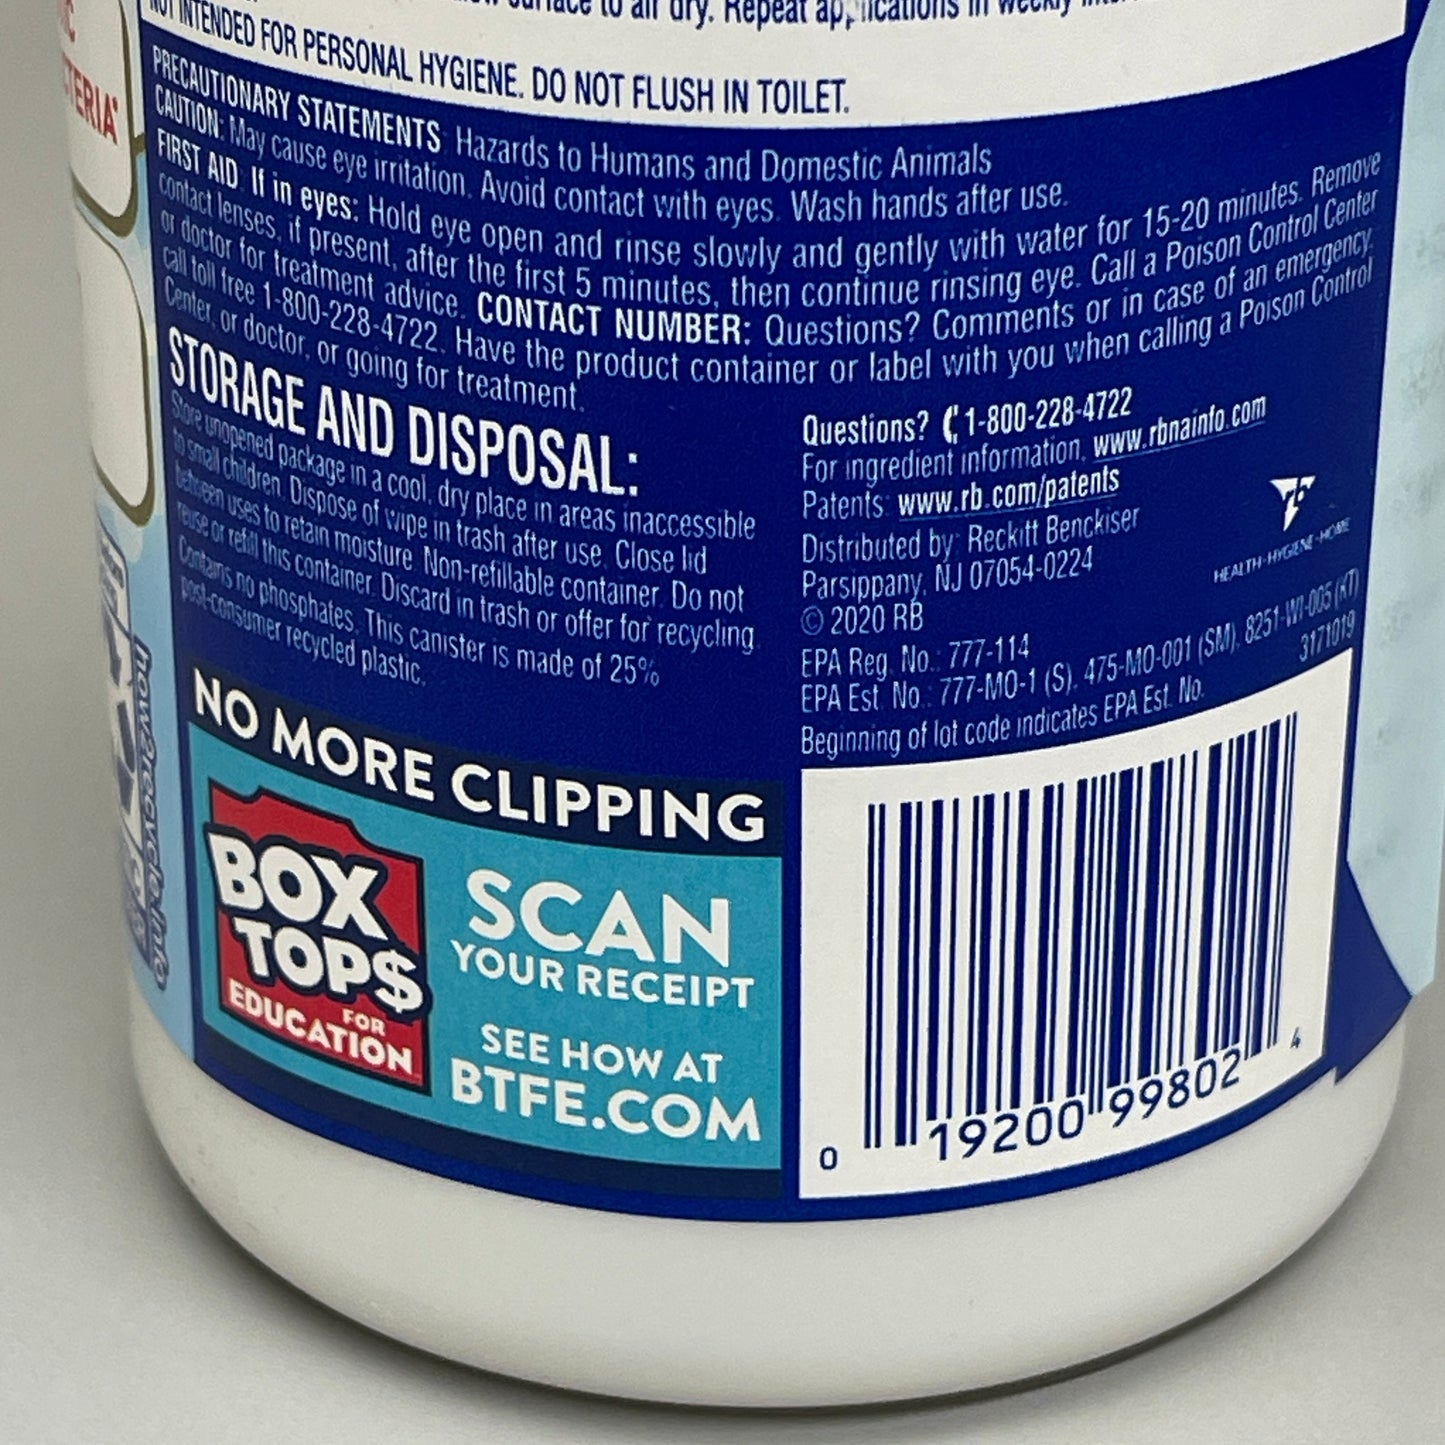 LYSOL 12-PACK! Disinfecting Wipes 35 Wet Wipes Each (420 total) Crisp Linen Scent 7.3 oz 3171754